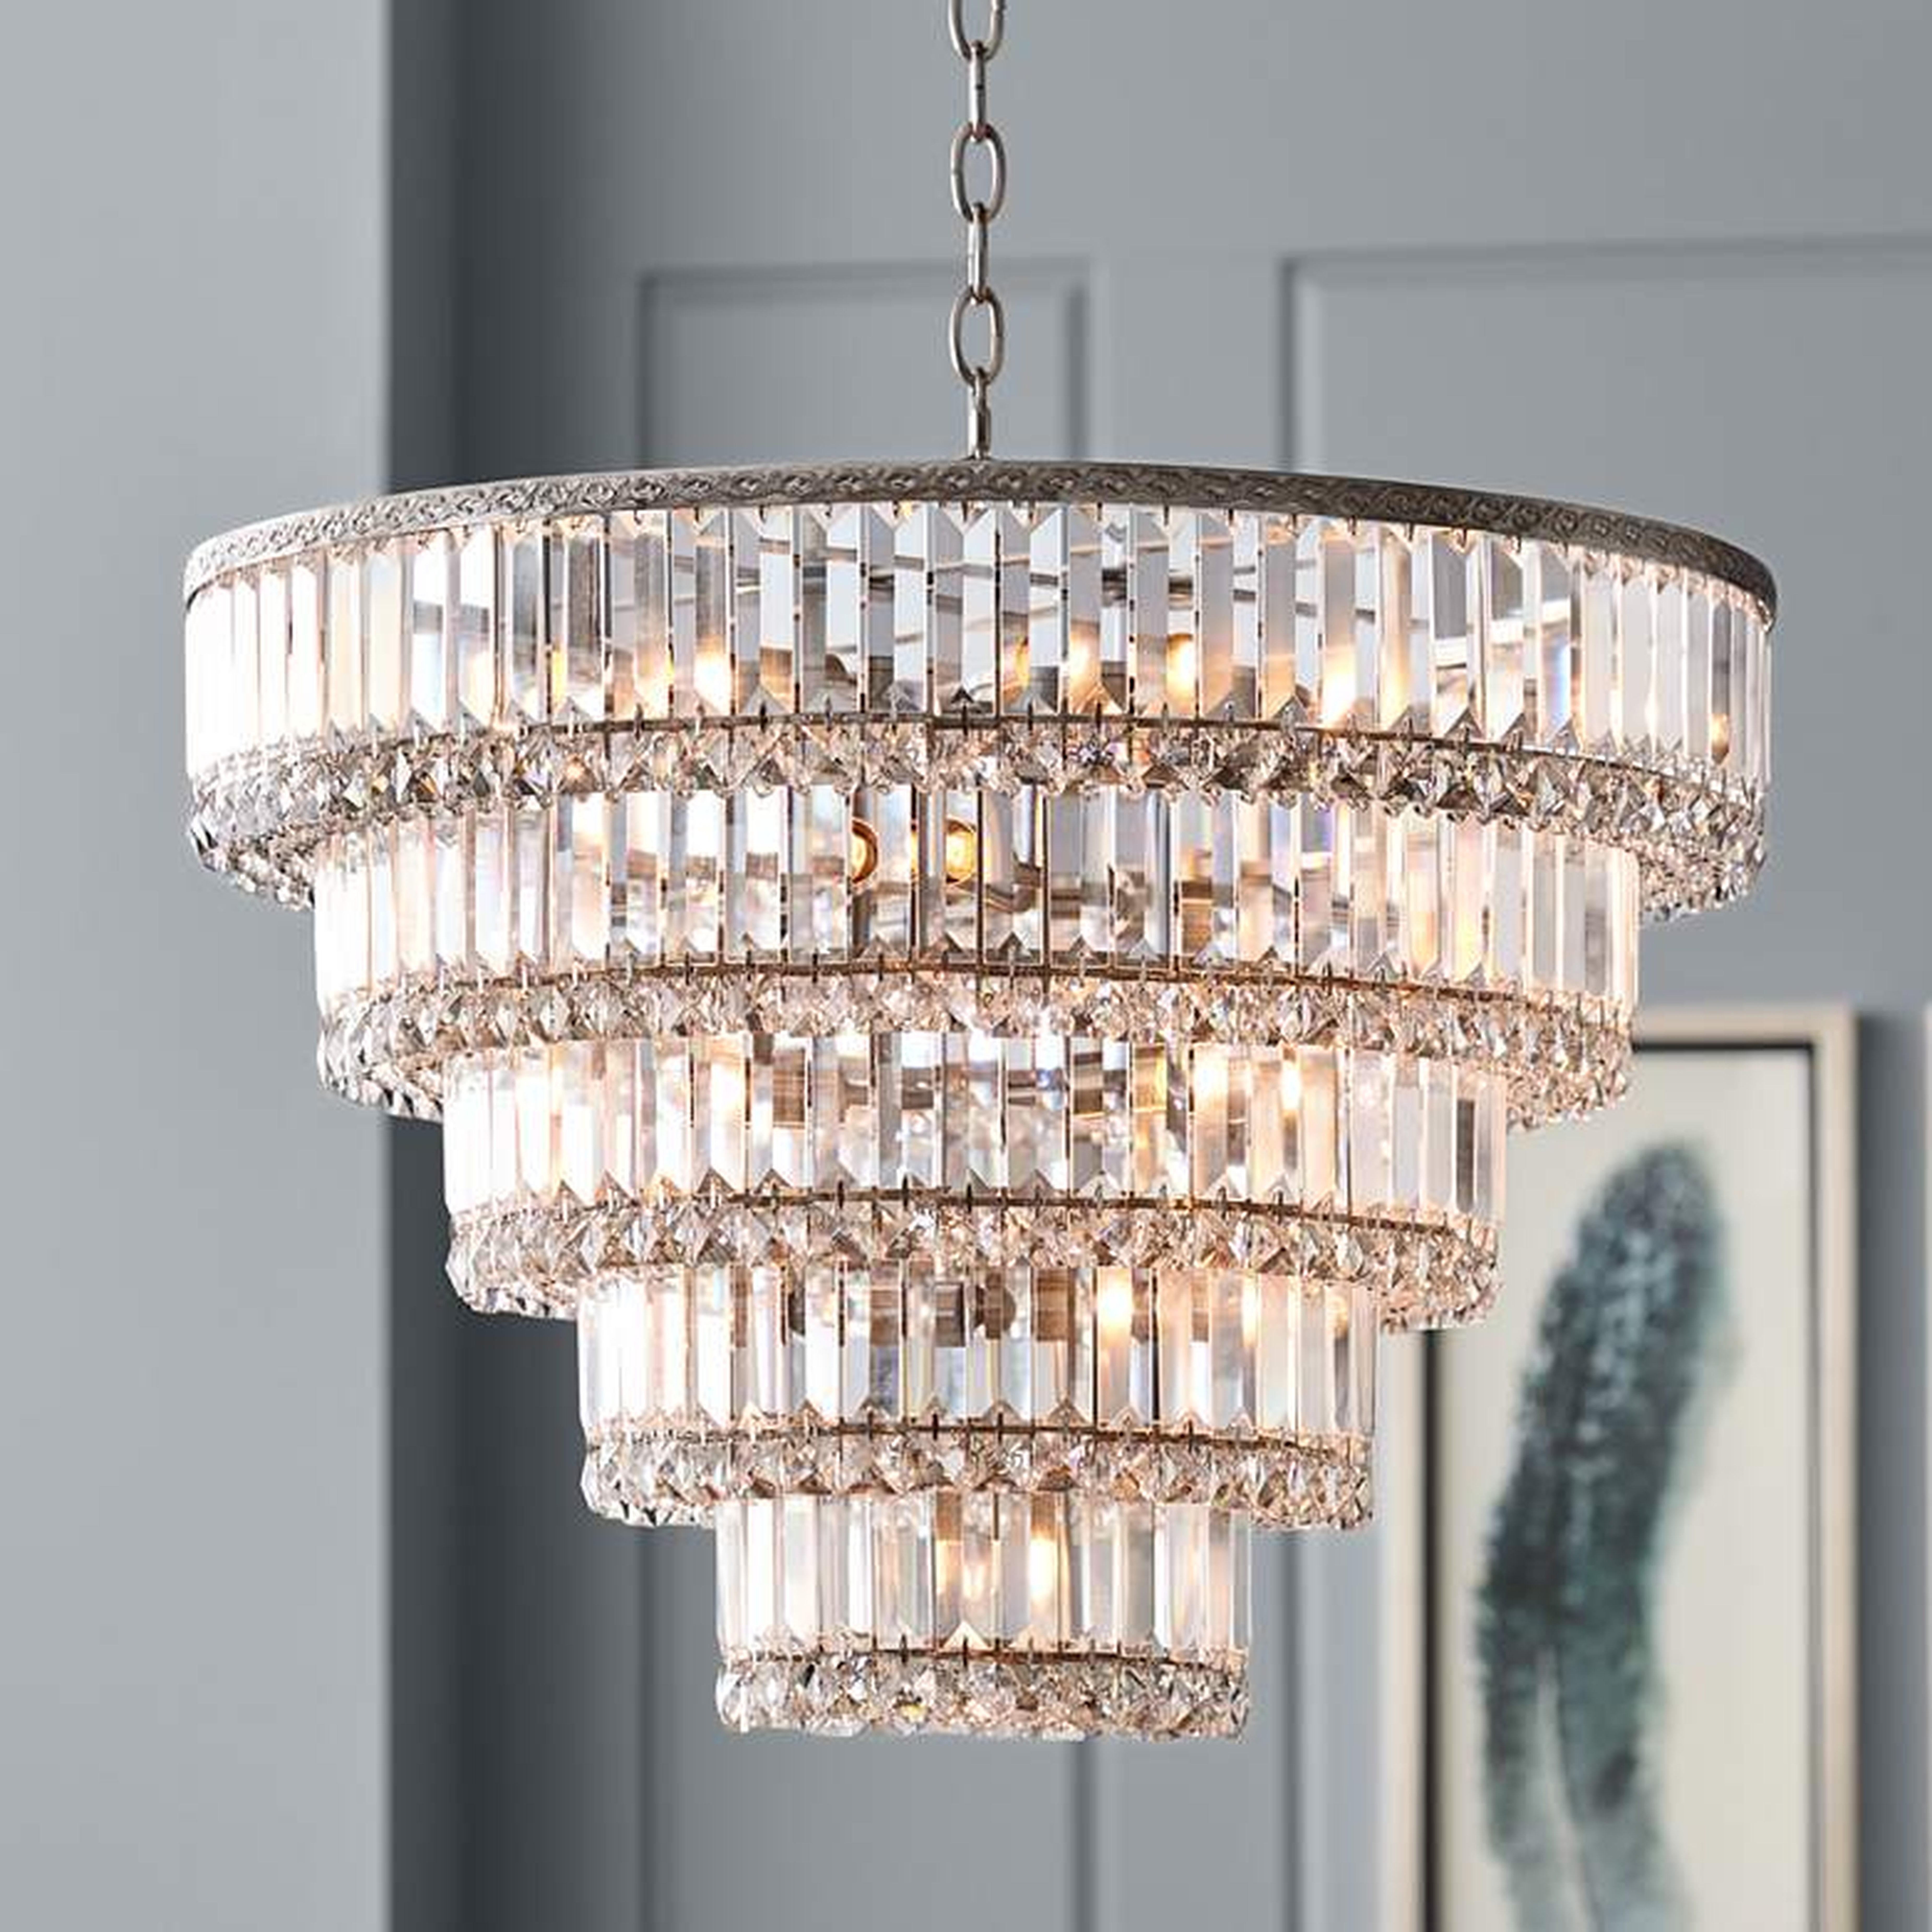 Magnificence Satin Nickel 24 1/2" Wide Crystal Ceiling Light - Lamps Plus